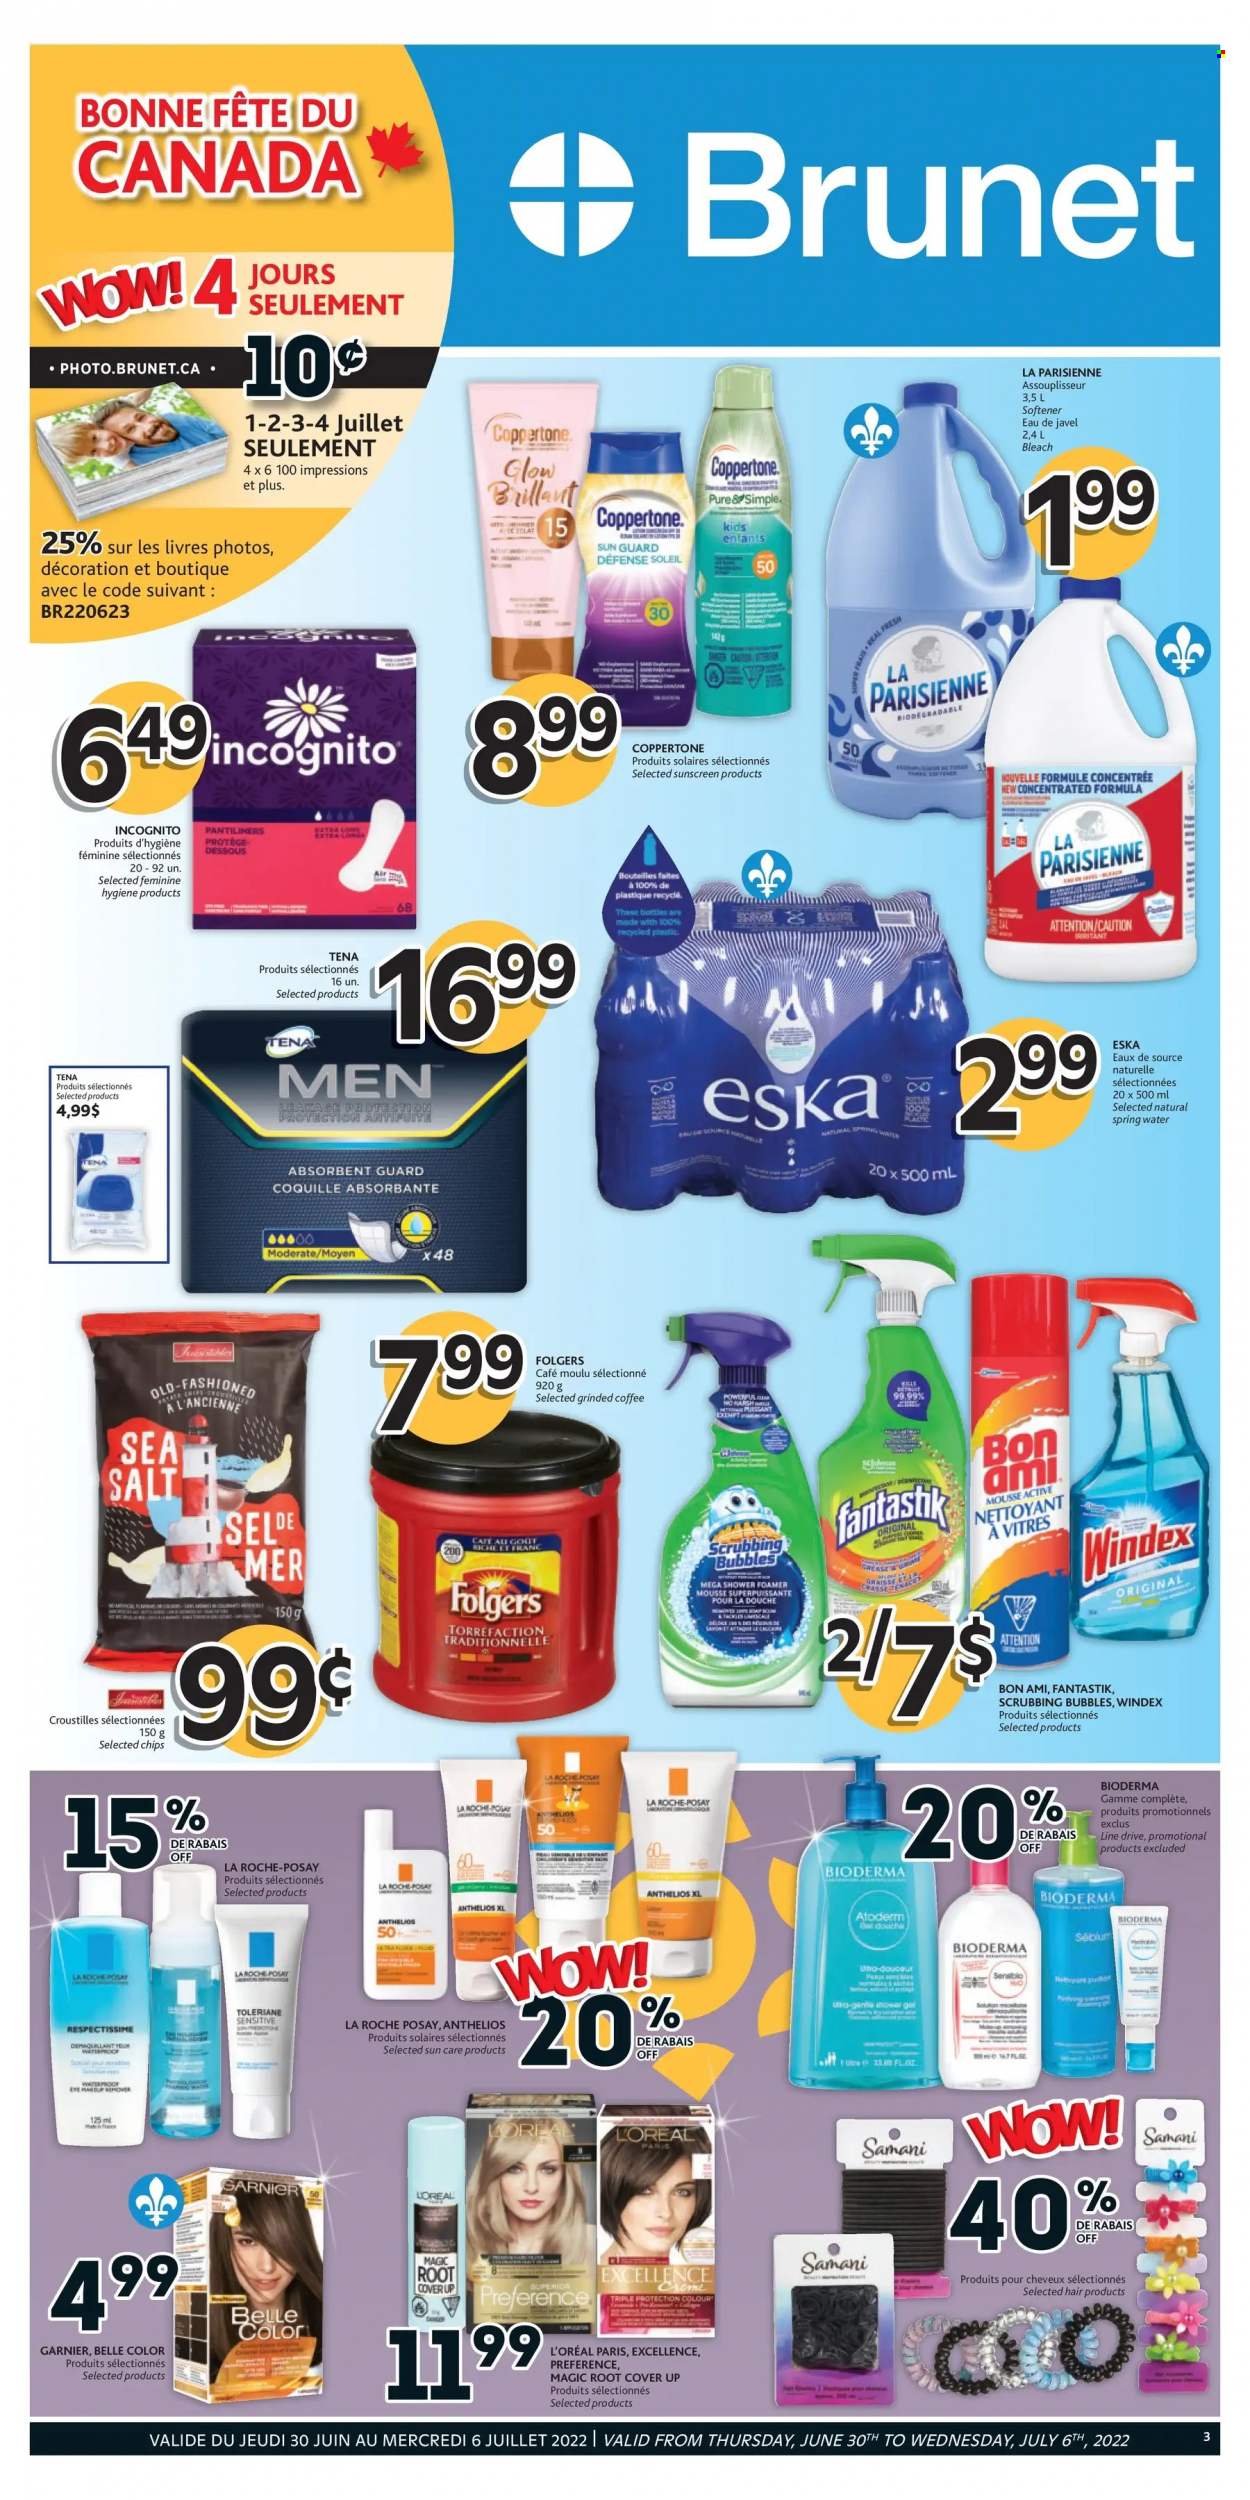 thumbnail - Brunet Flyer - June 30, 2022 - July 06, 2022 - Sales products - chips, spring water, coffee, Folgers, Windex, Scrubbing Bubbles, bleach, fabric softener, pantiliners, L’Oréal, La Roche-Posay, Garnier. Page 1.